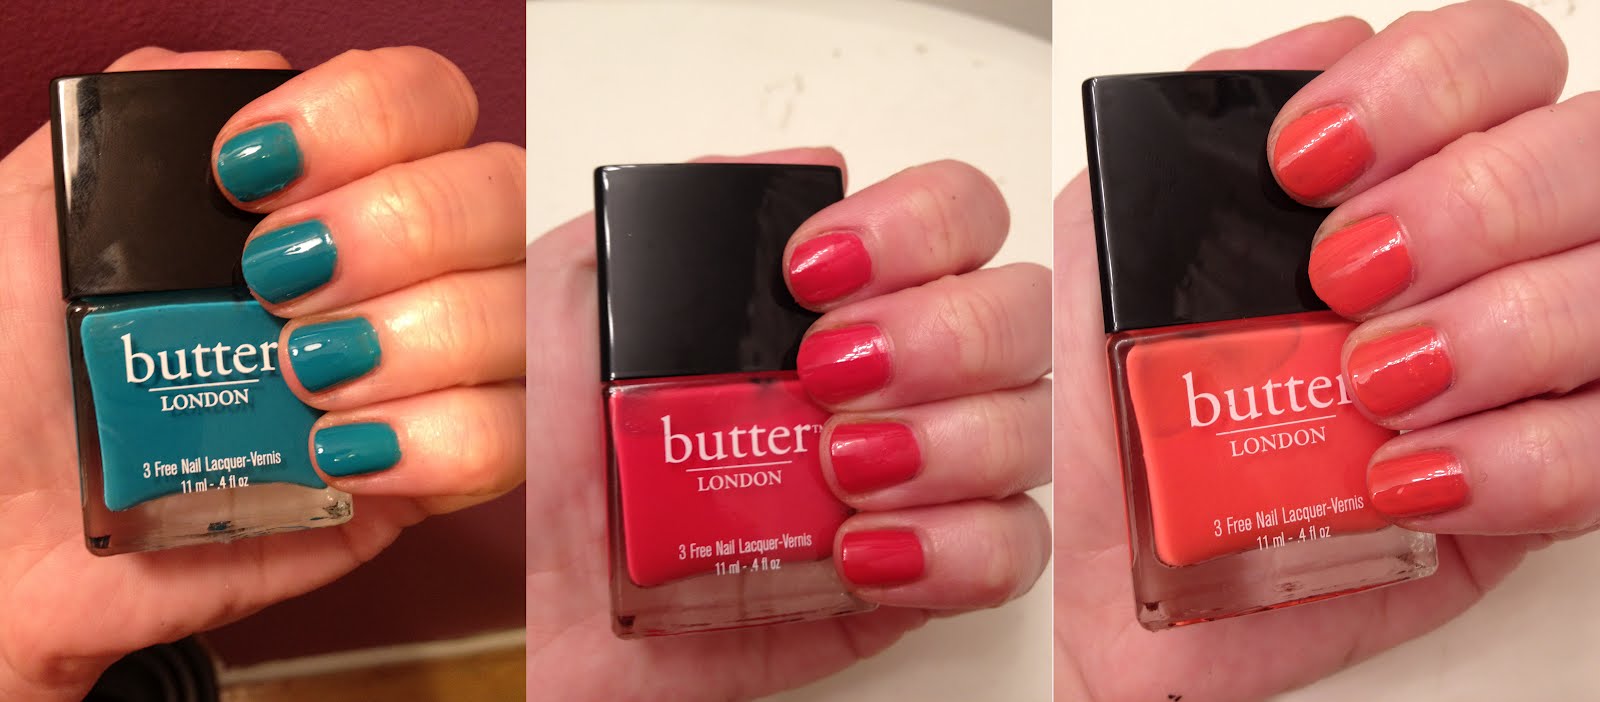 Butter London Nail Lacquer in "Teddy Girl" - wide 5